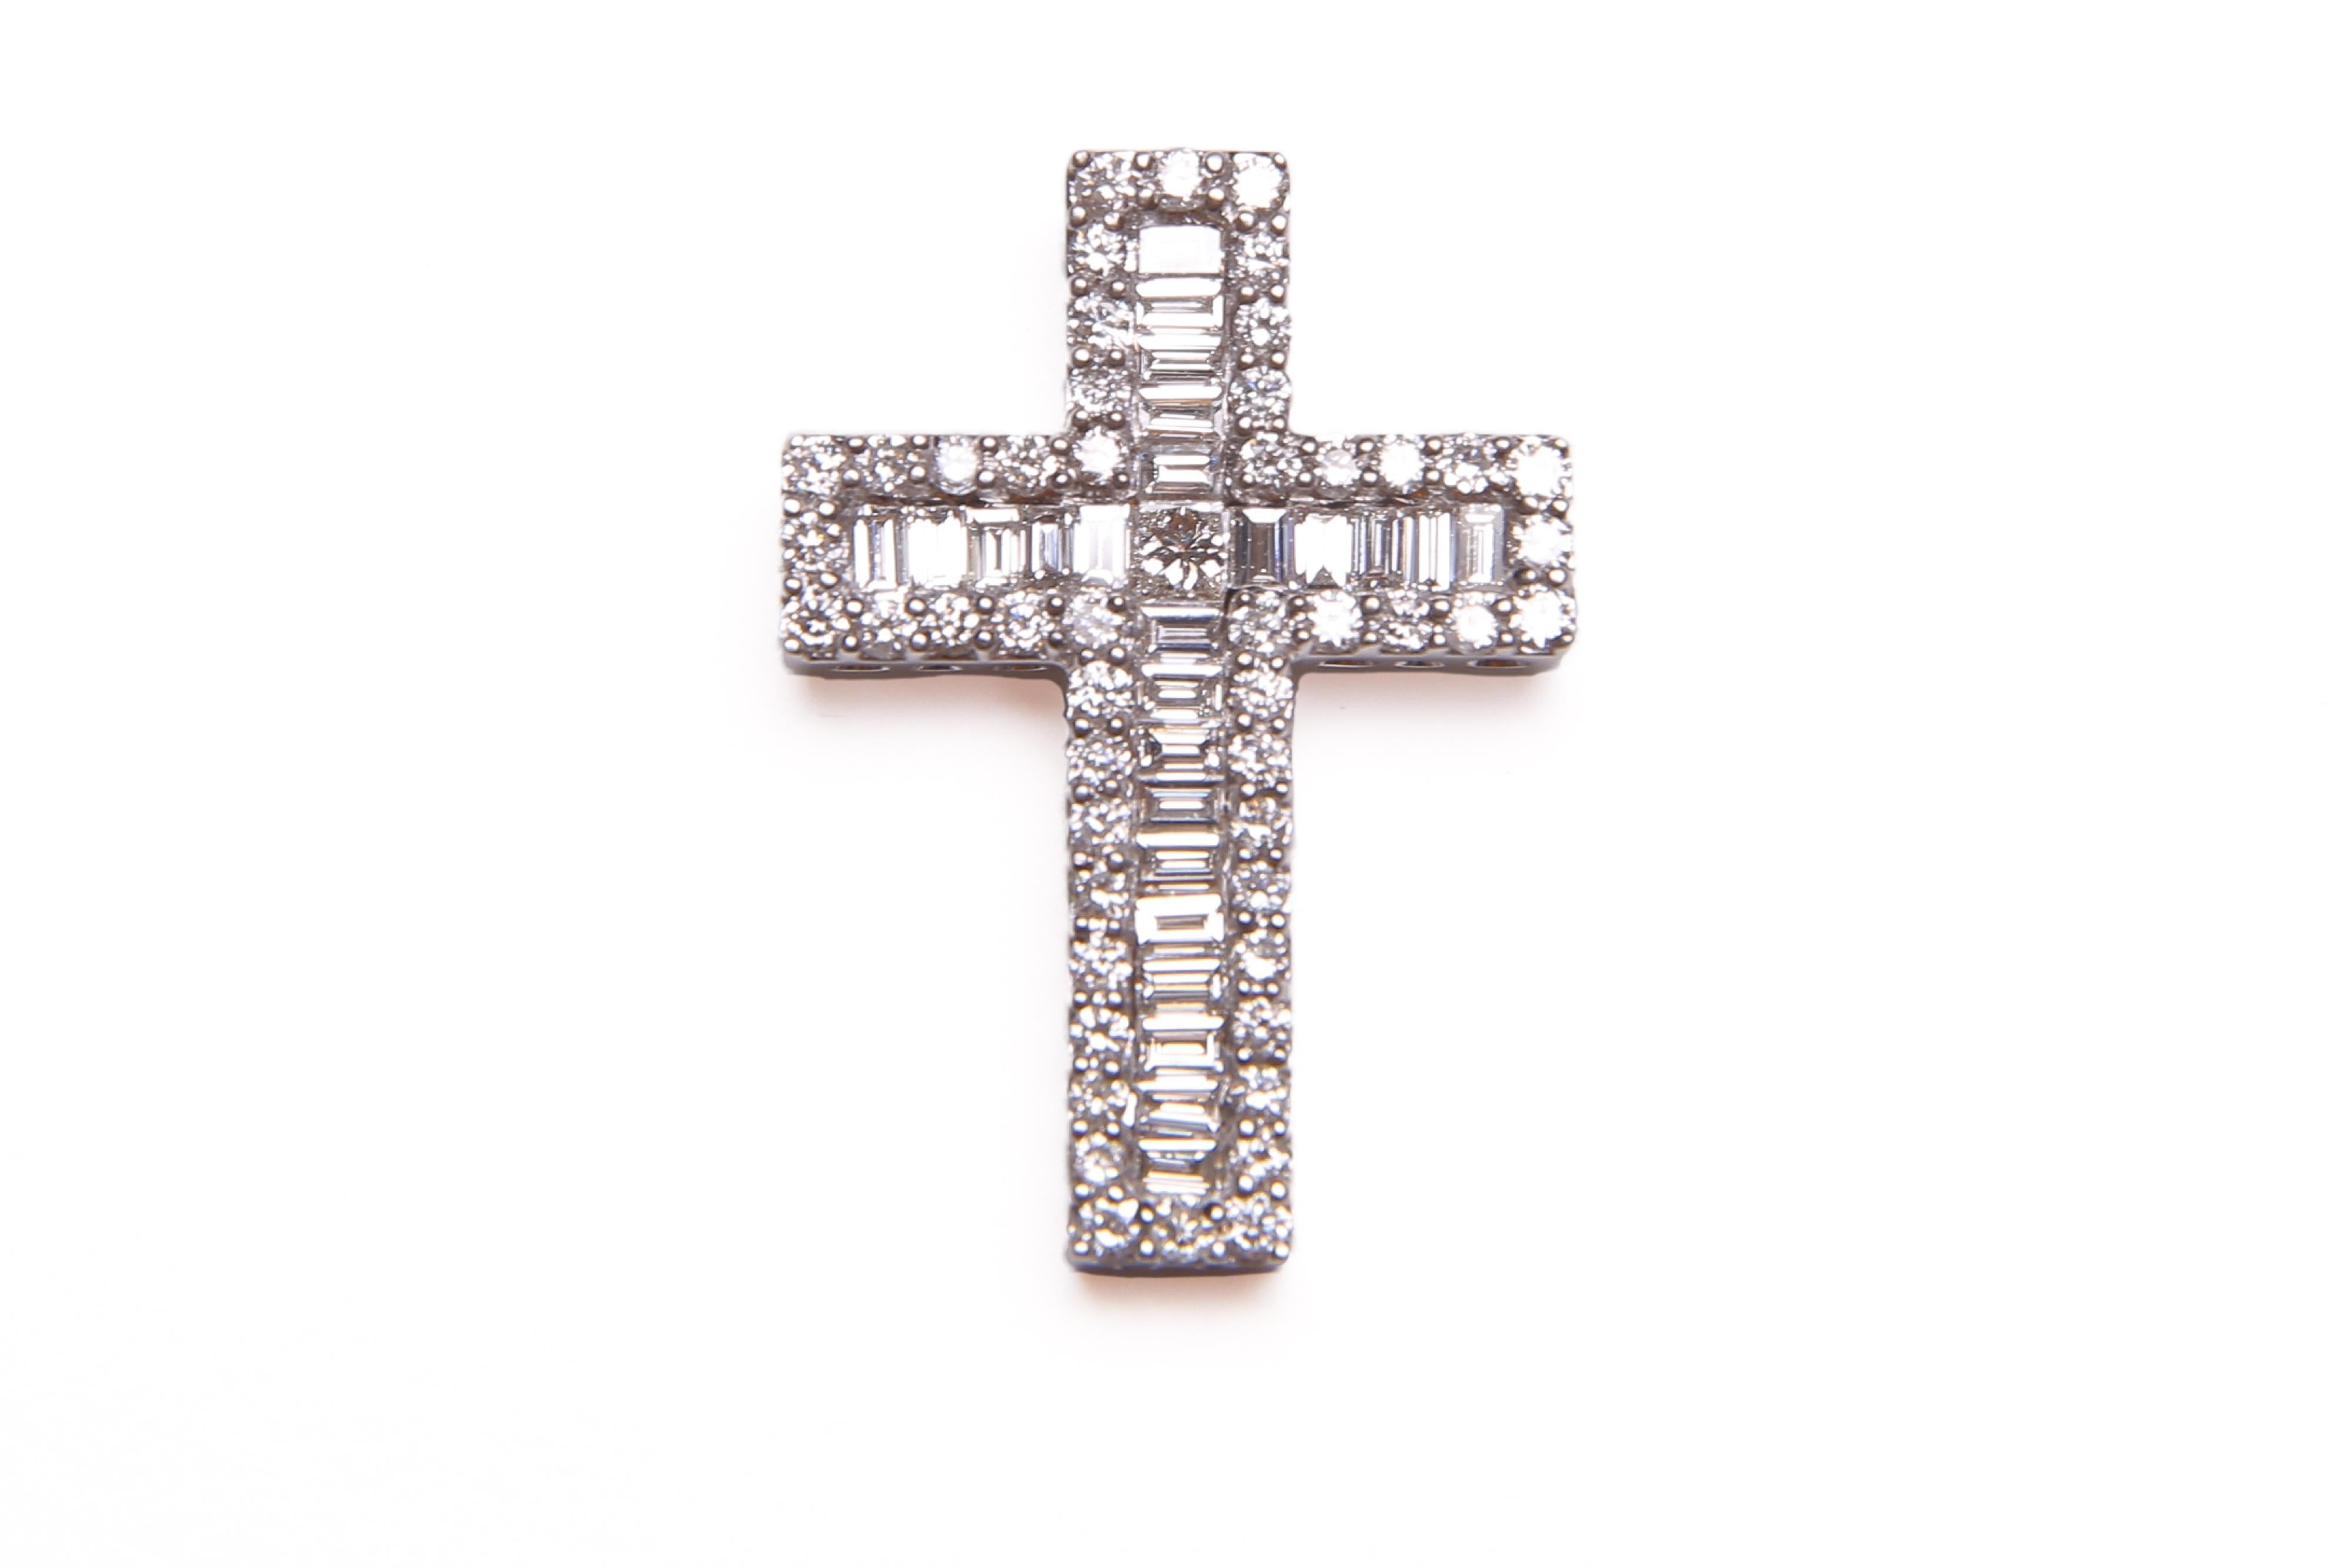 White Gold and Diamond Cross or Crucifix Pendant, 77 Diamonds in Total 1.5 Carat For Sale 3